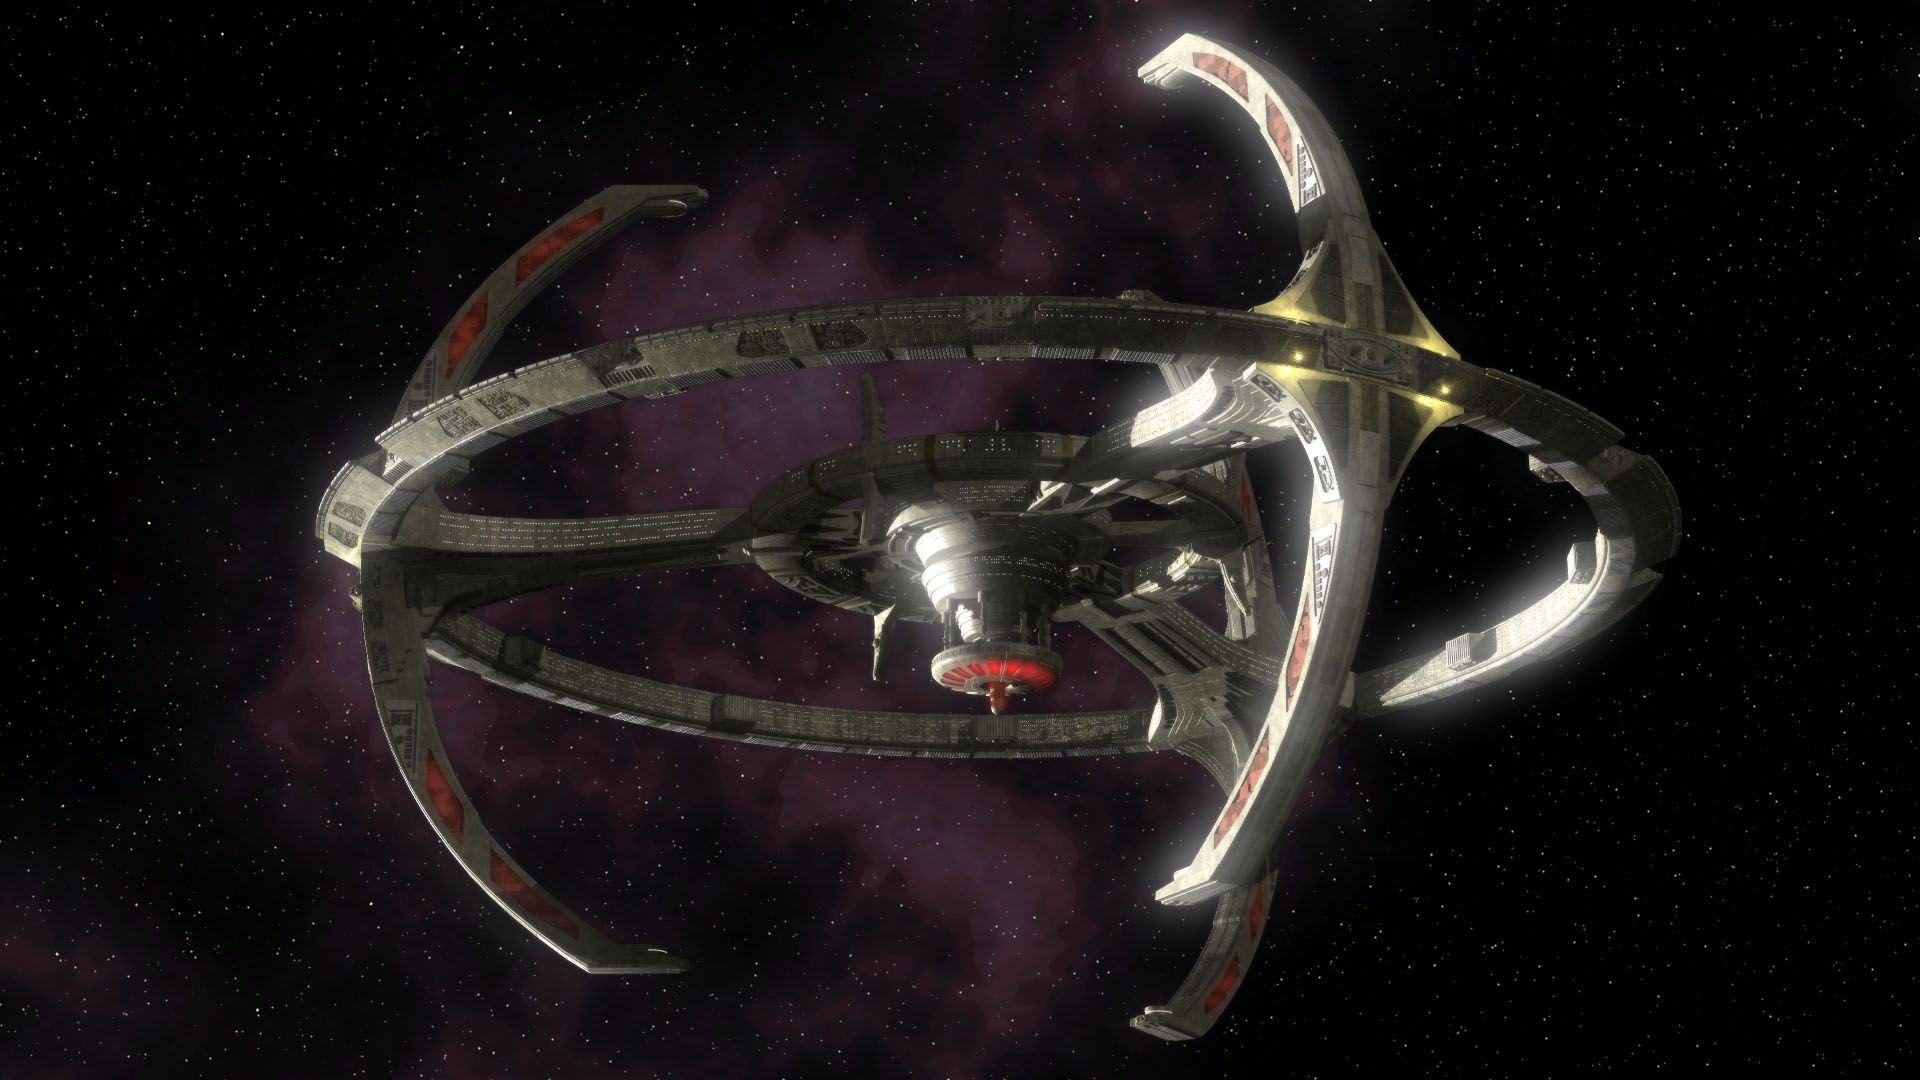 Deep Space Nine Wallpaper - HD Wallpapers and Pictures